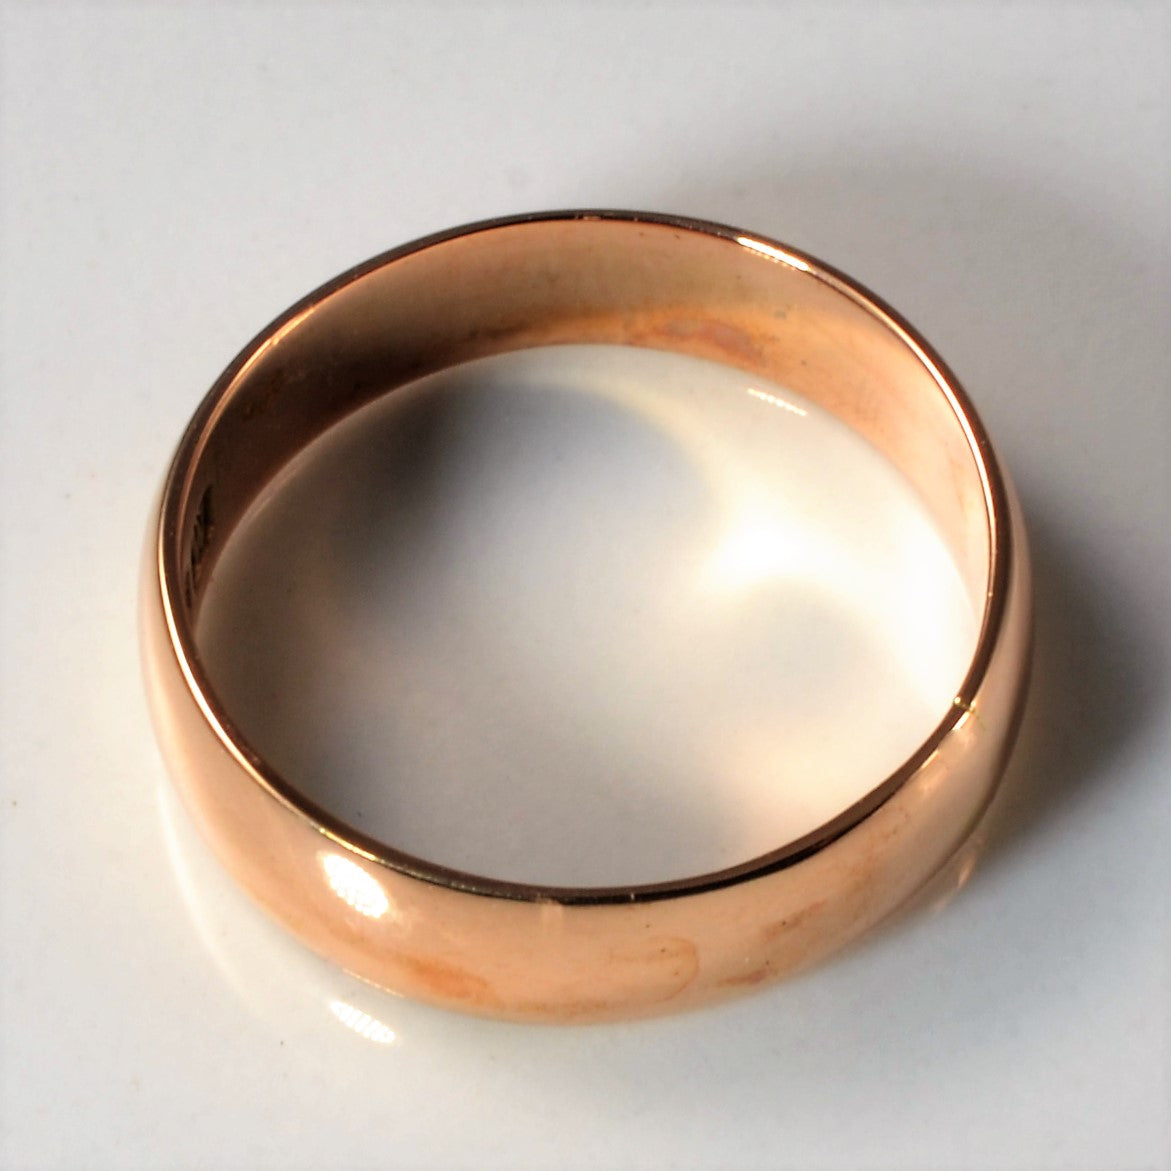 vintage Rose gold band, antique rings for sale in Canada